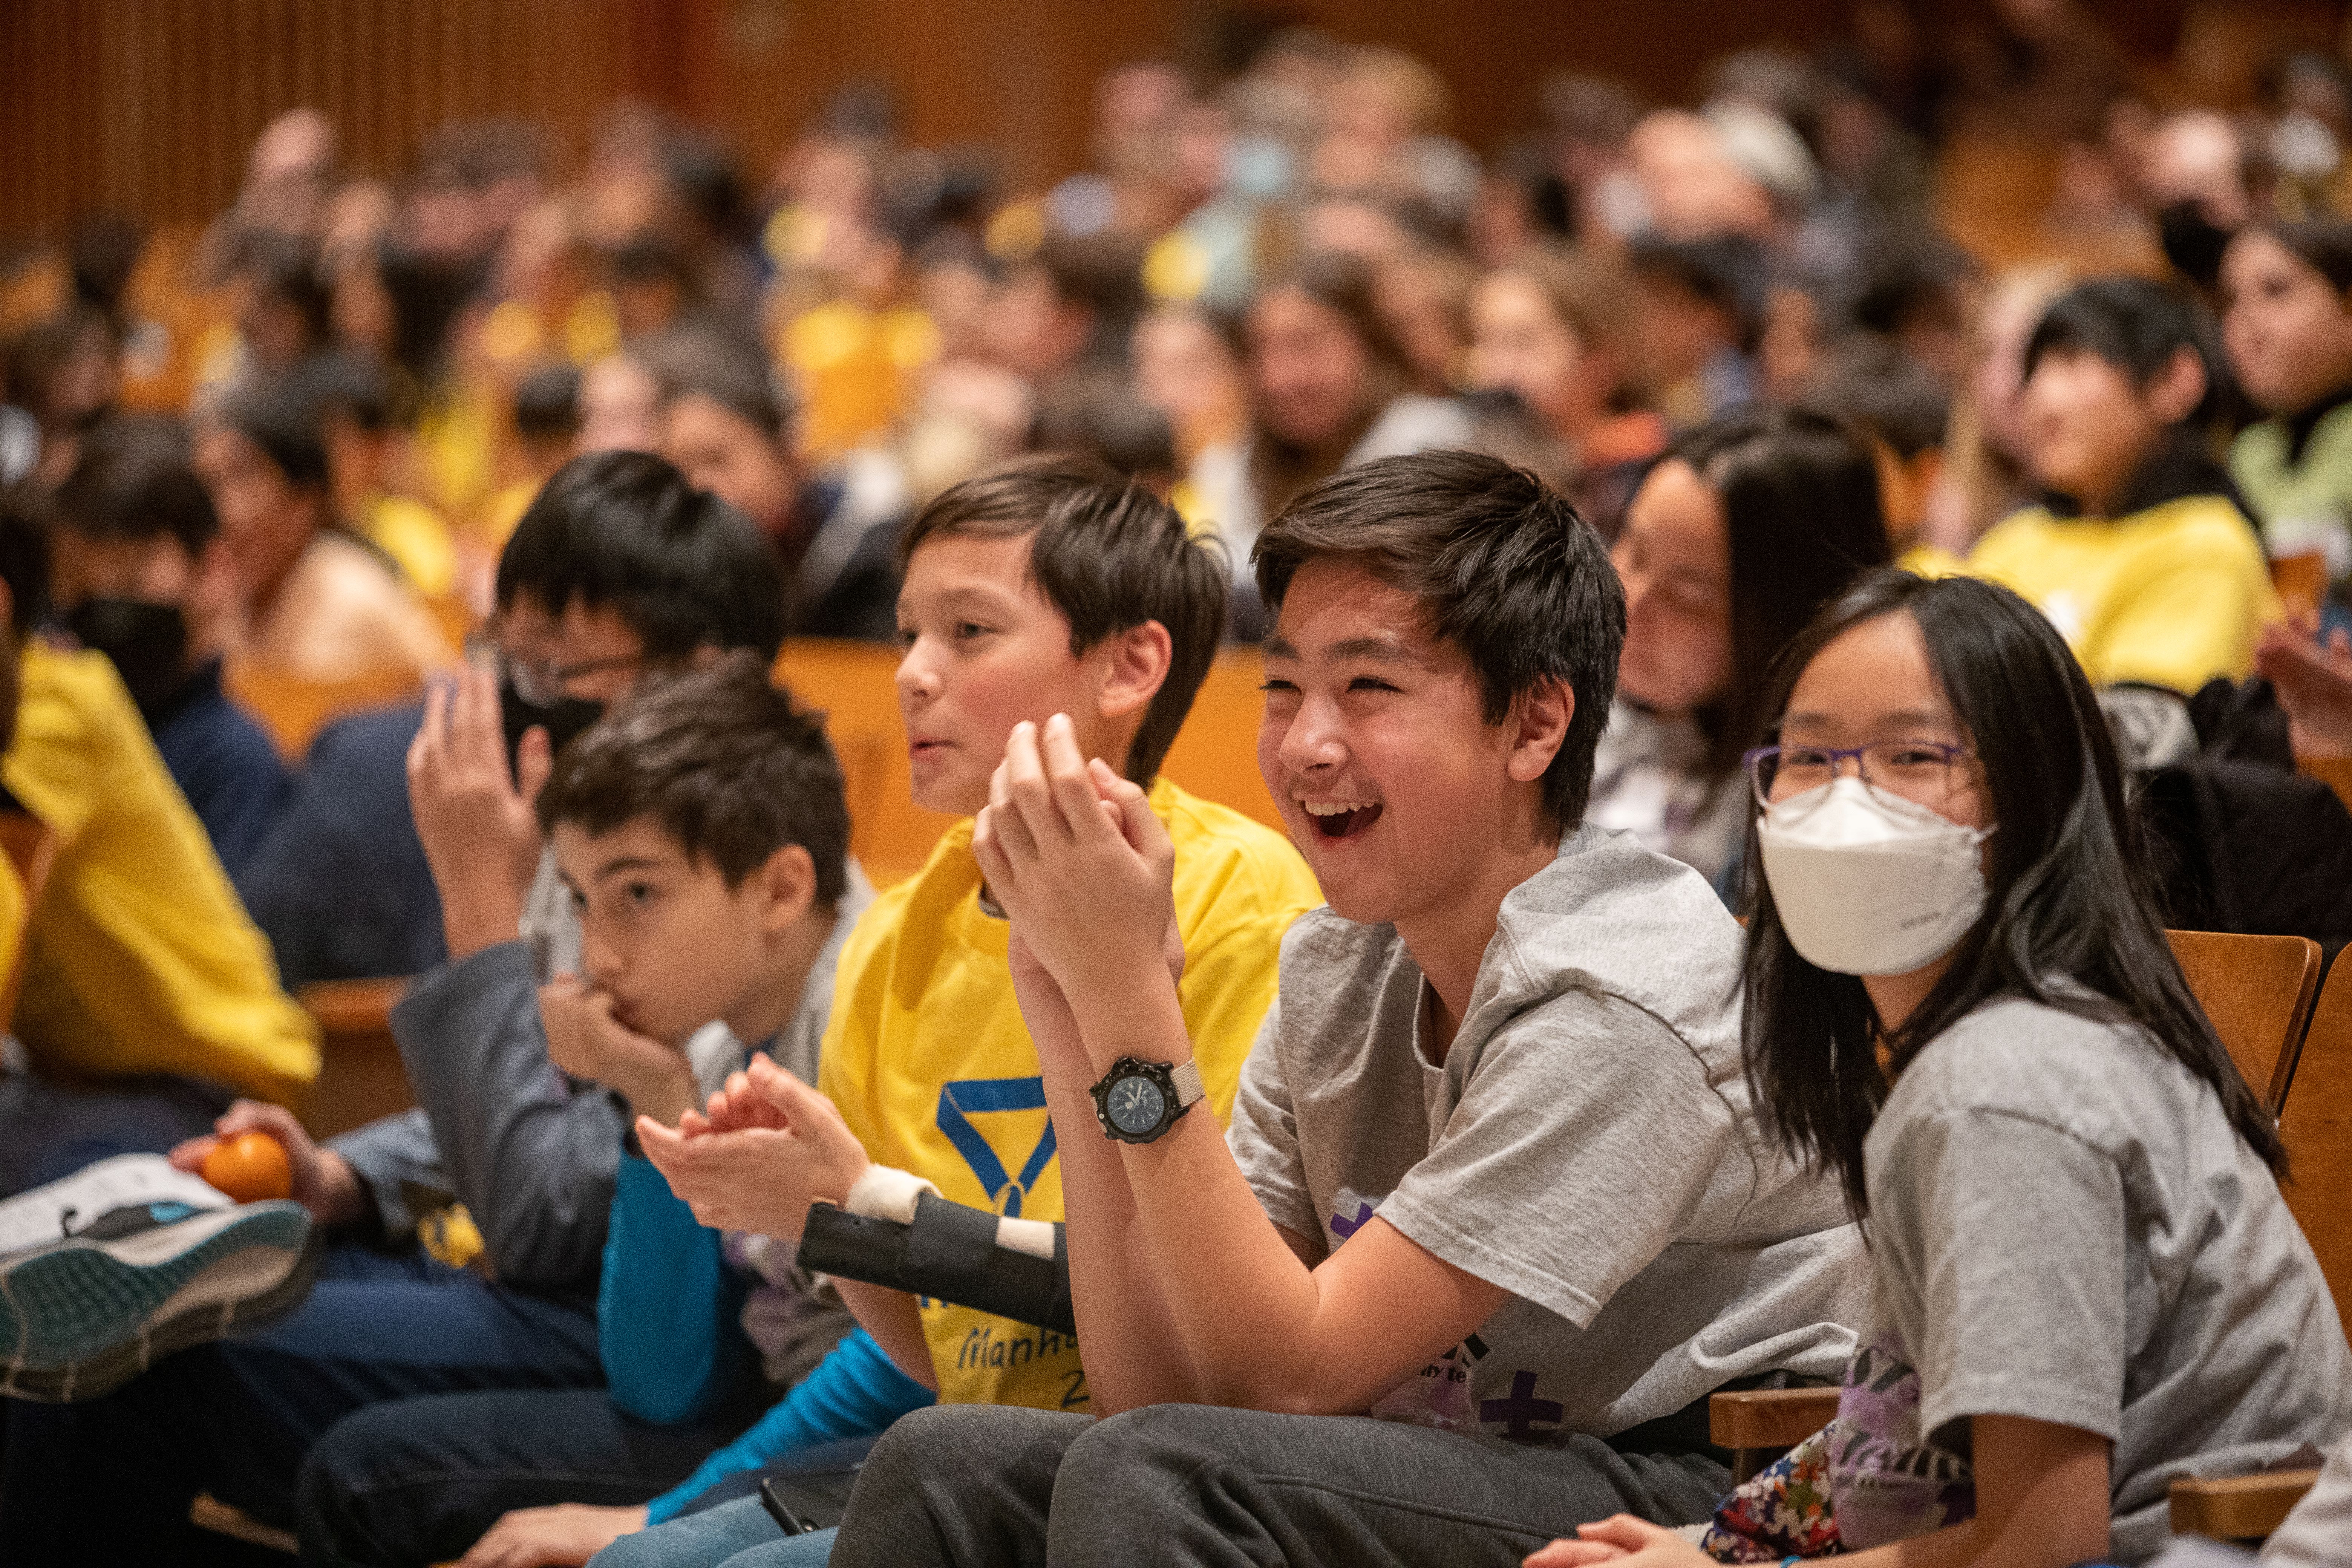 Students smile and clap in an auditorium wearing MATHCOUNTS shirts.